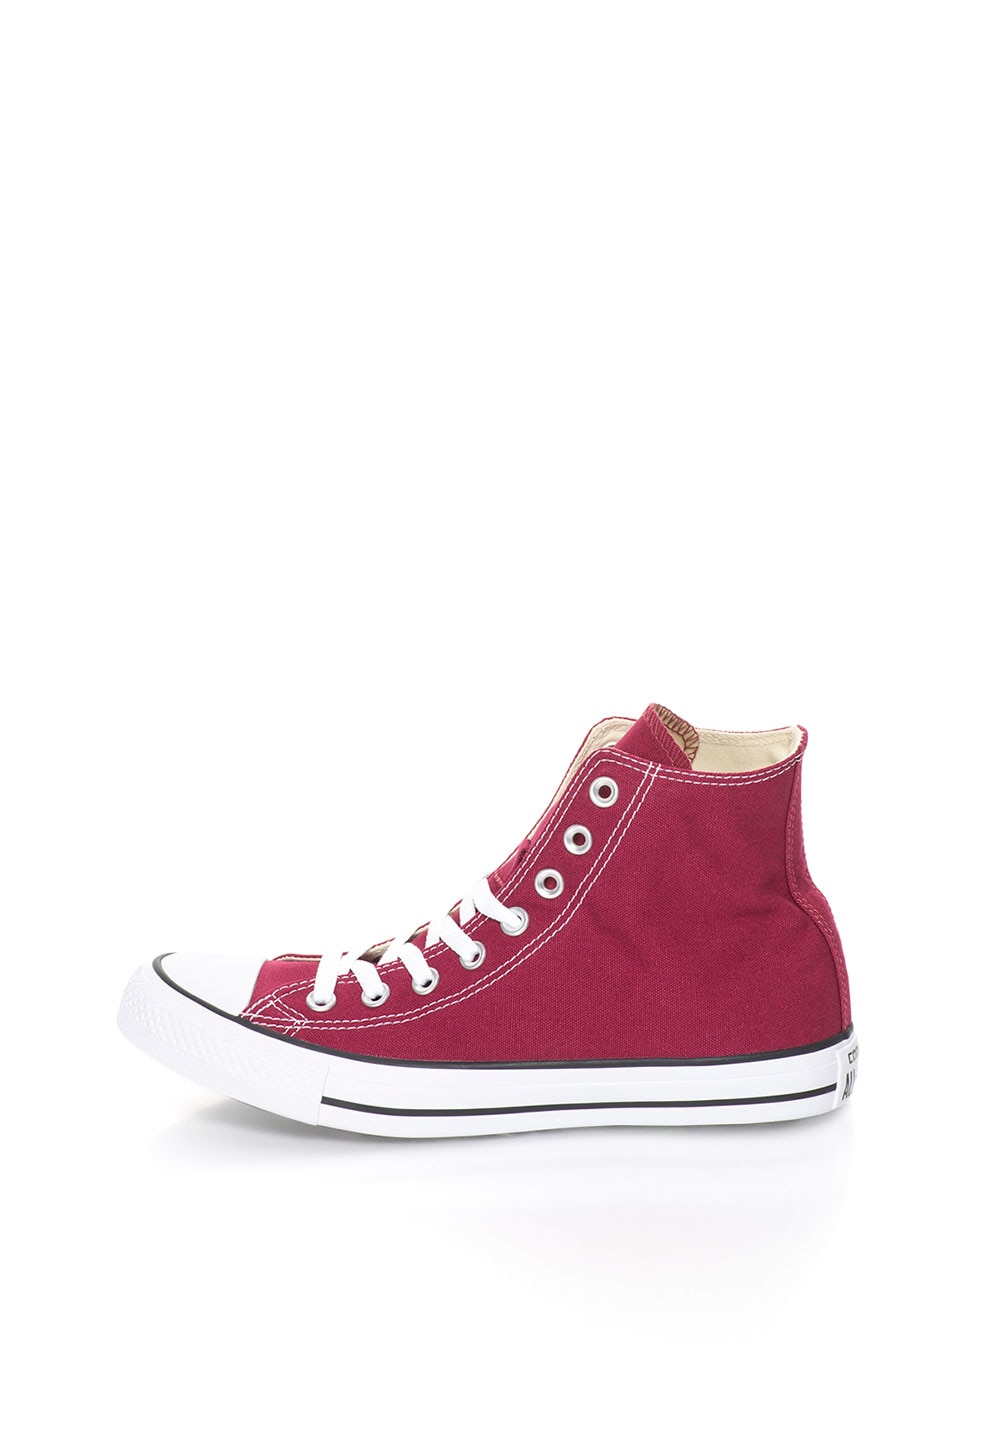 Committee Cucumber pendant Converse, Tenisi inalti unisex Chuck Taylor All Star Specialty - eMAG.ro